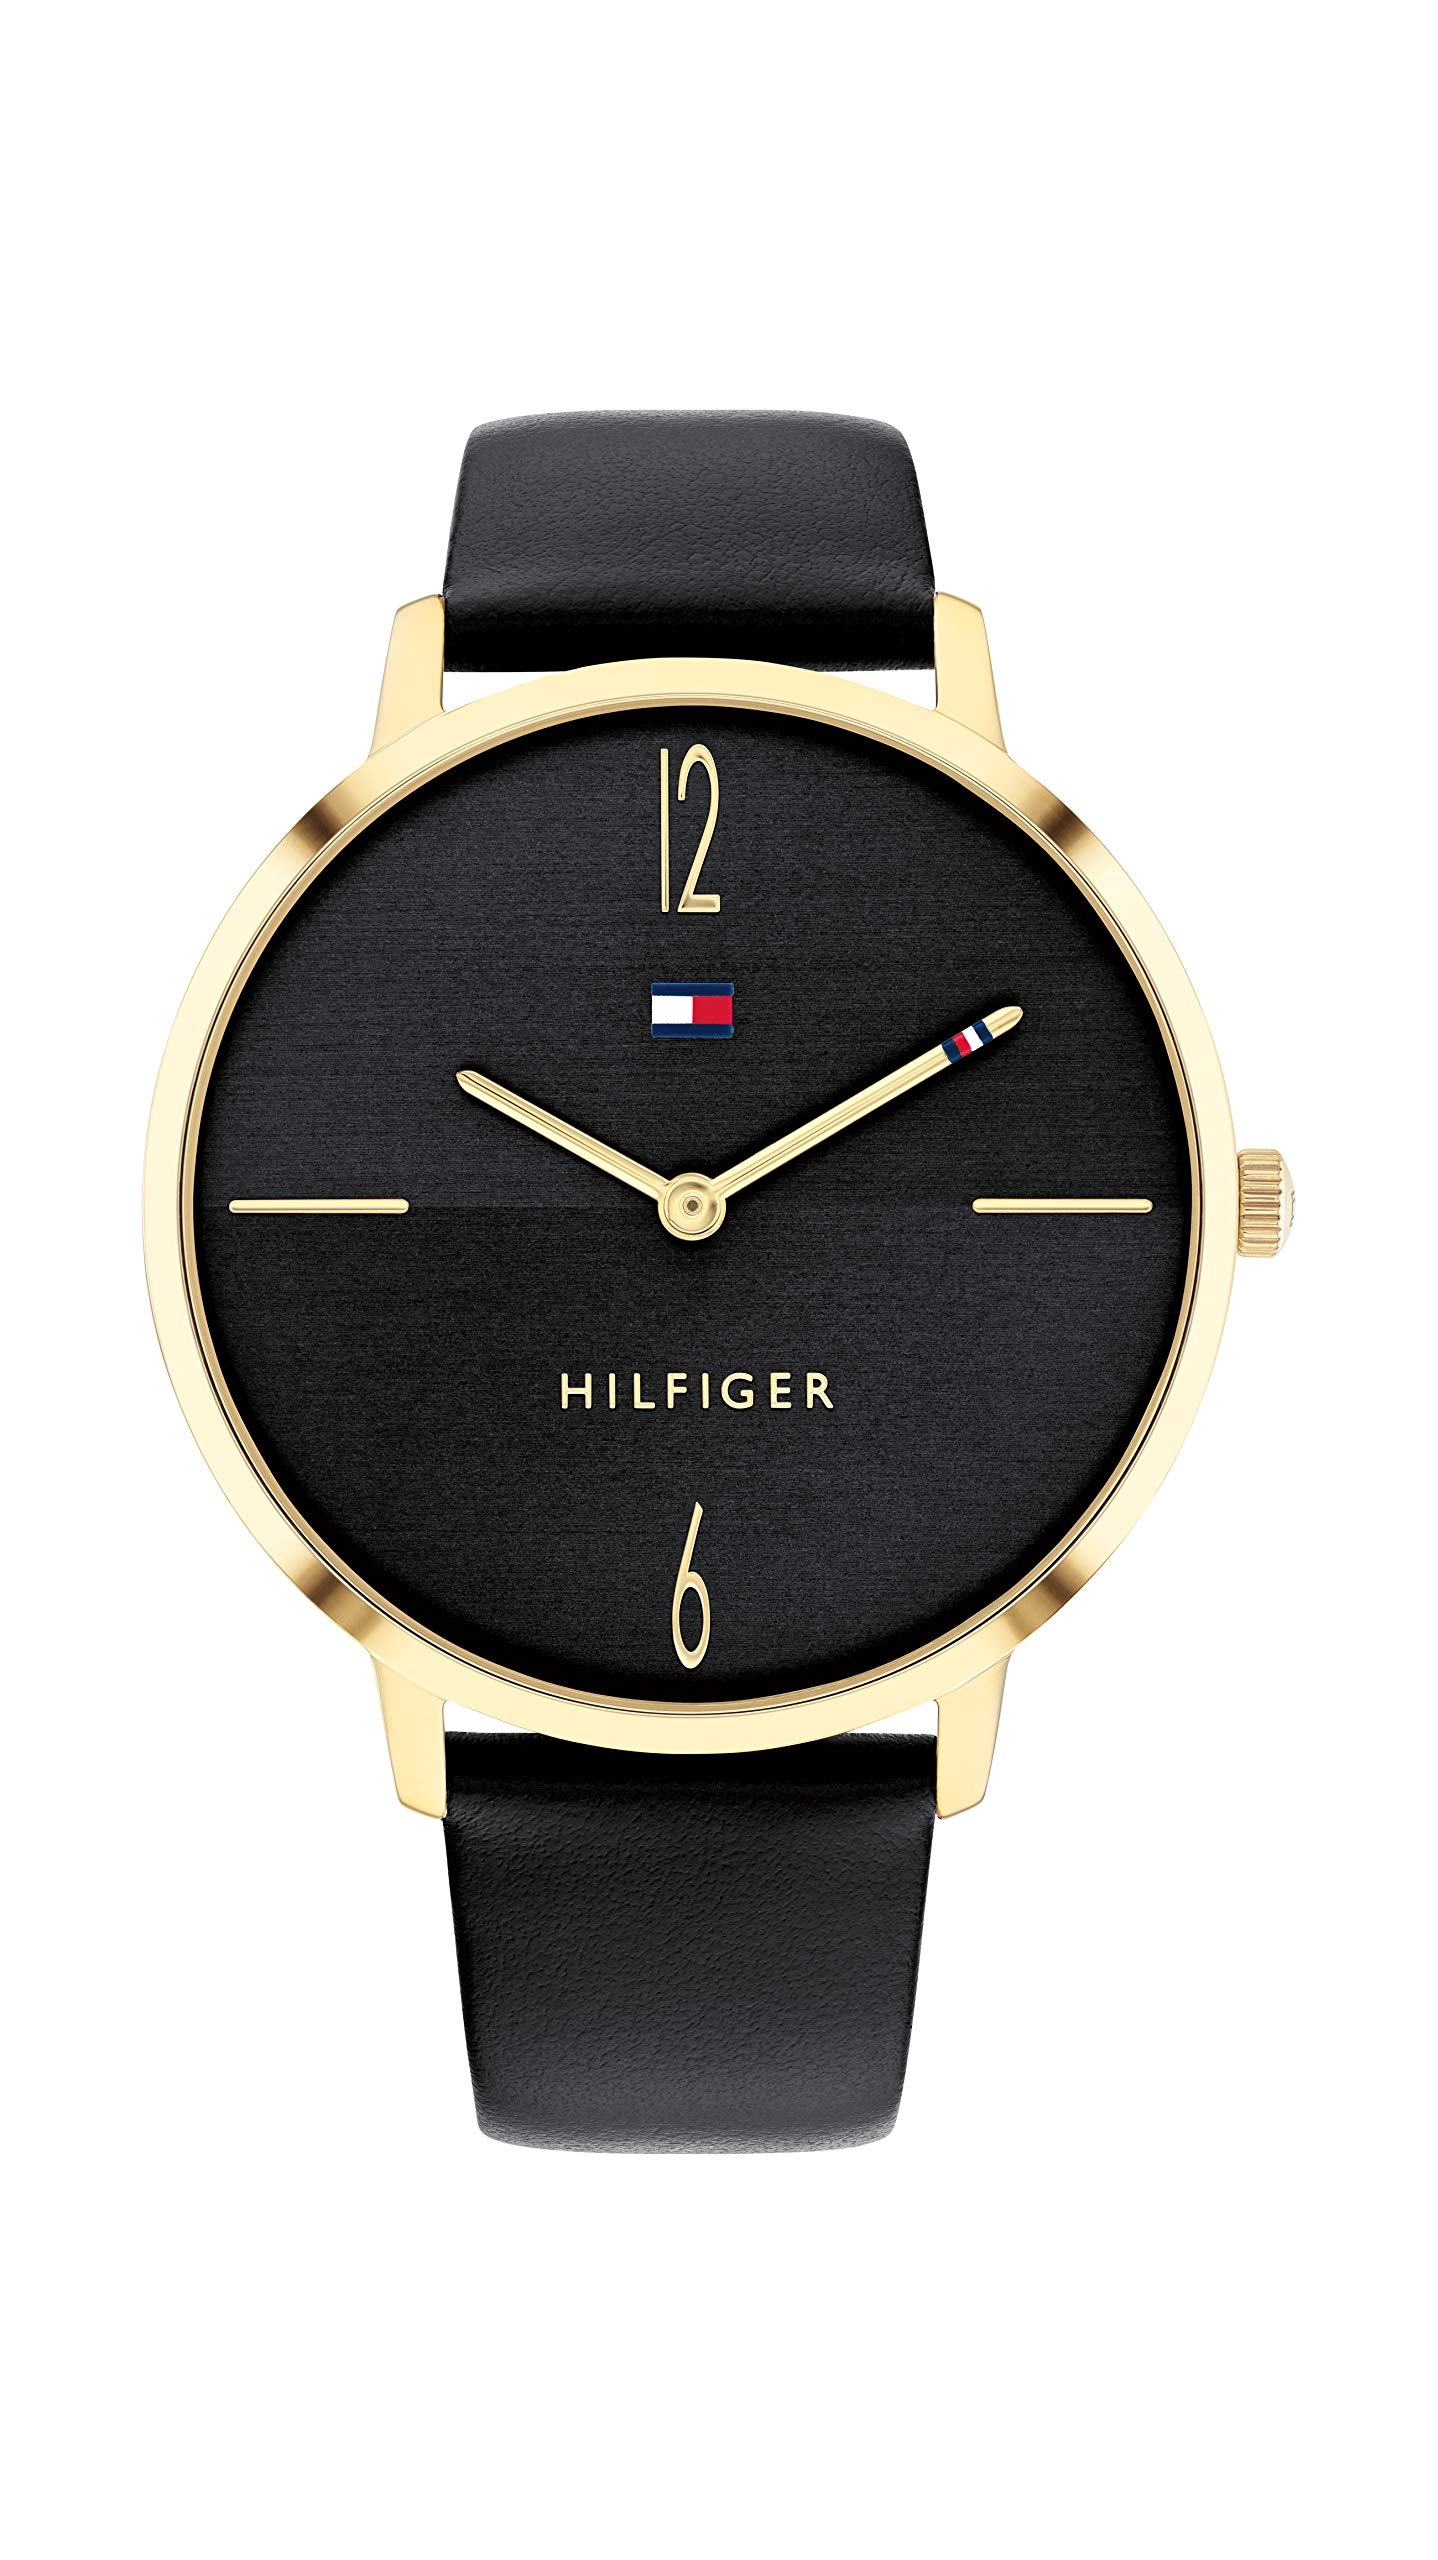 Tommy Hilfiger Women's Stainless Steel Quartz Watch with Leather Strap, Color: Black (Model: 1782379)